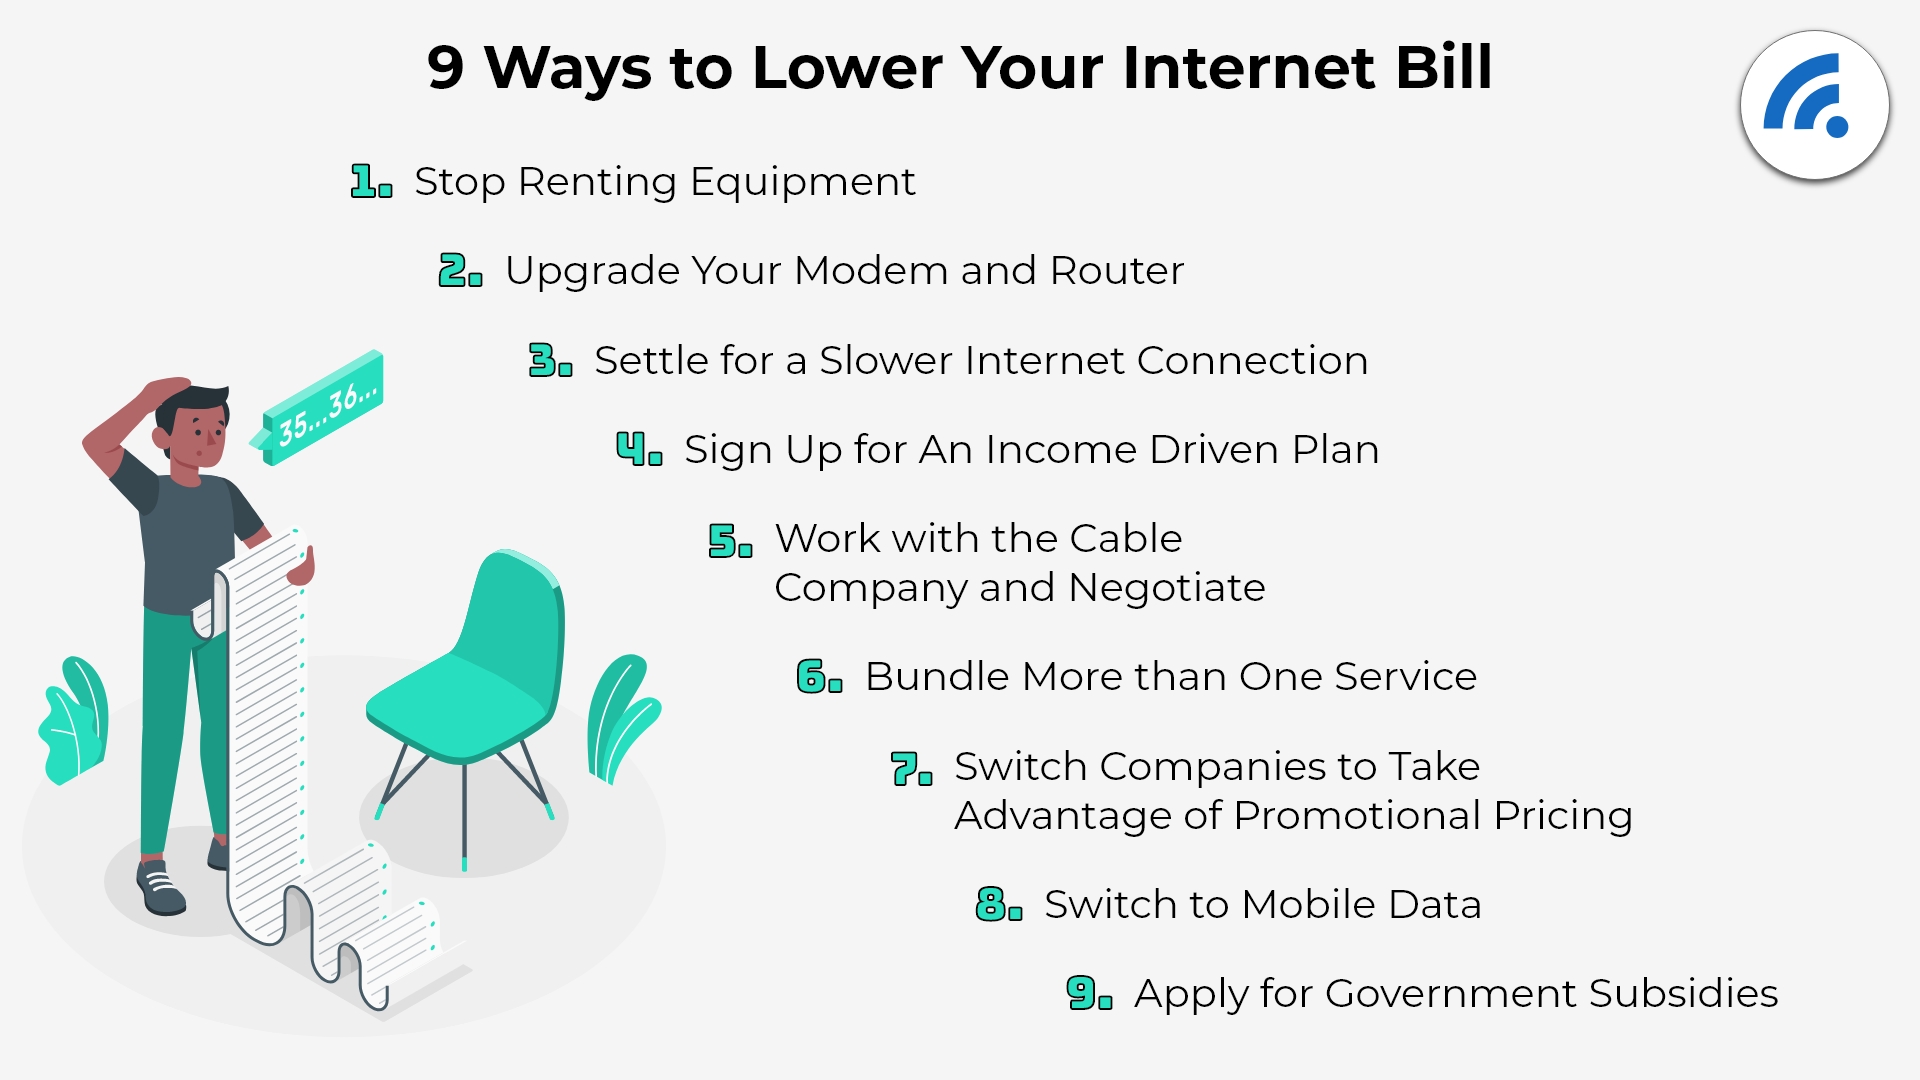 9 Ways to Lower Your Internet Bill